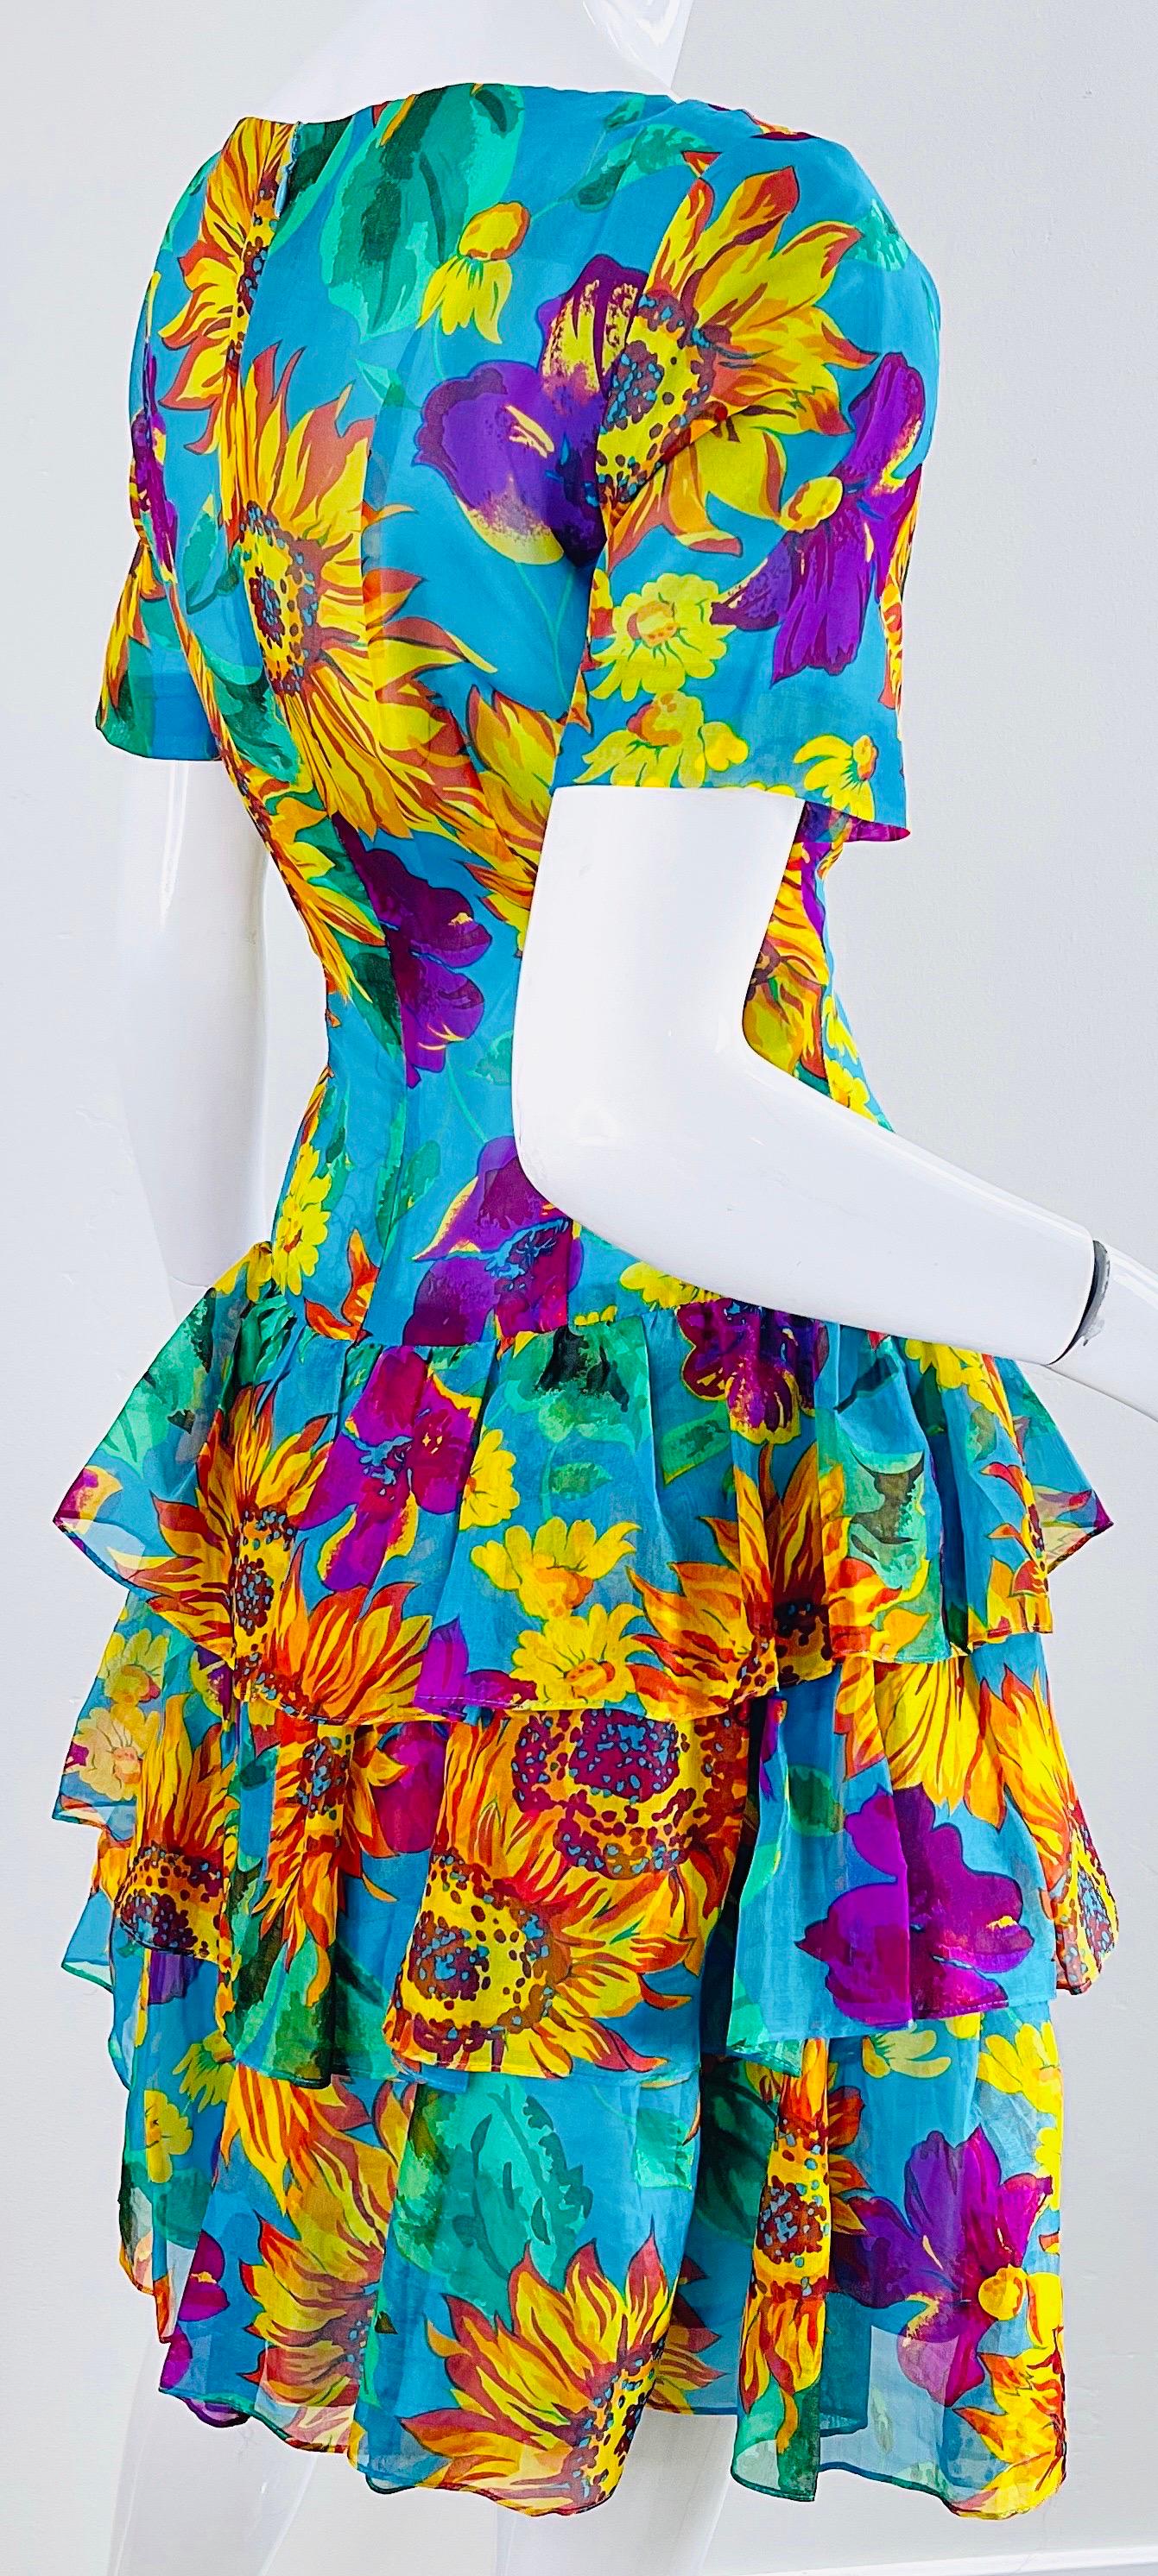 Chic 1980s Silk Chiffon Size 8 / 10 Sunflower Print Turquoise Vintage 80s Dress For Sale 4